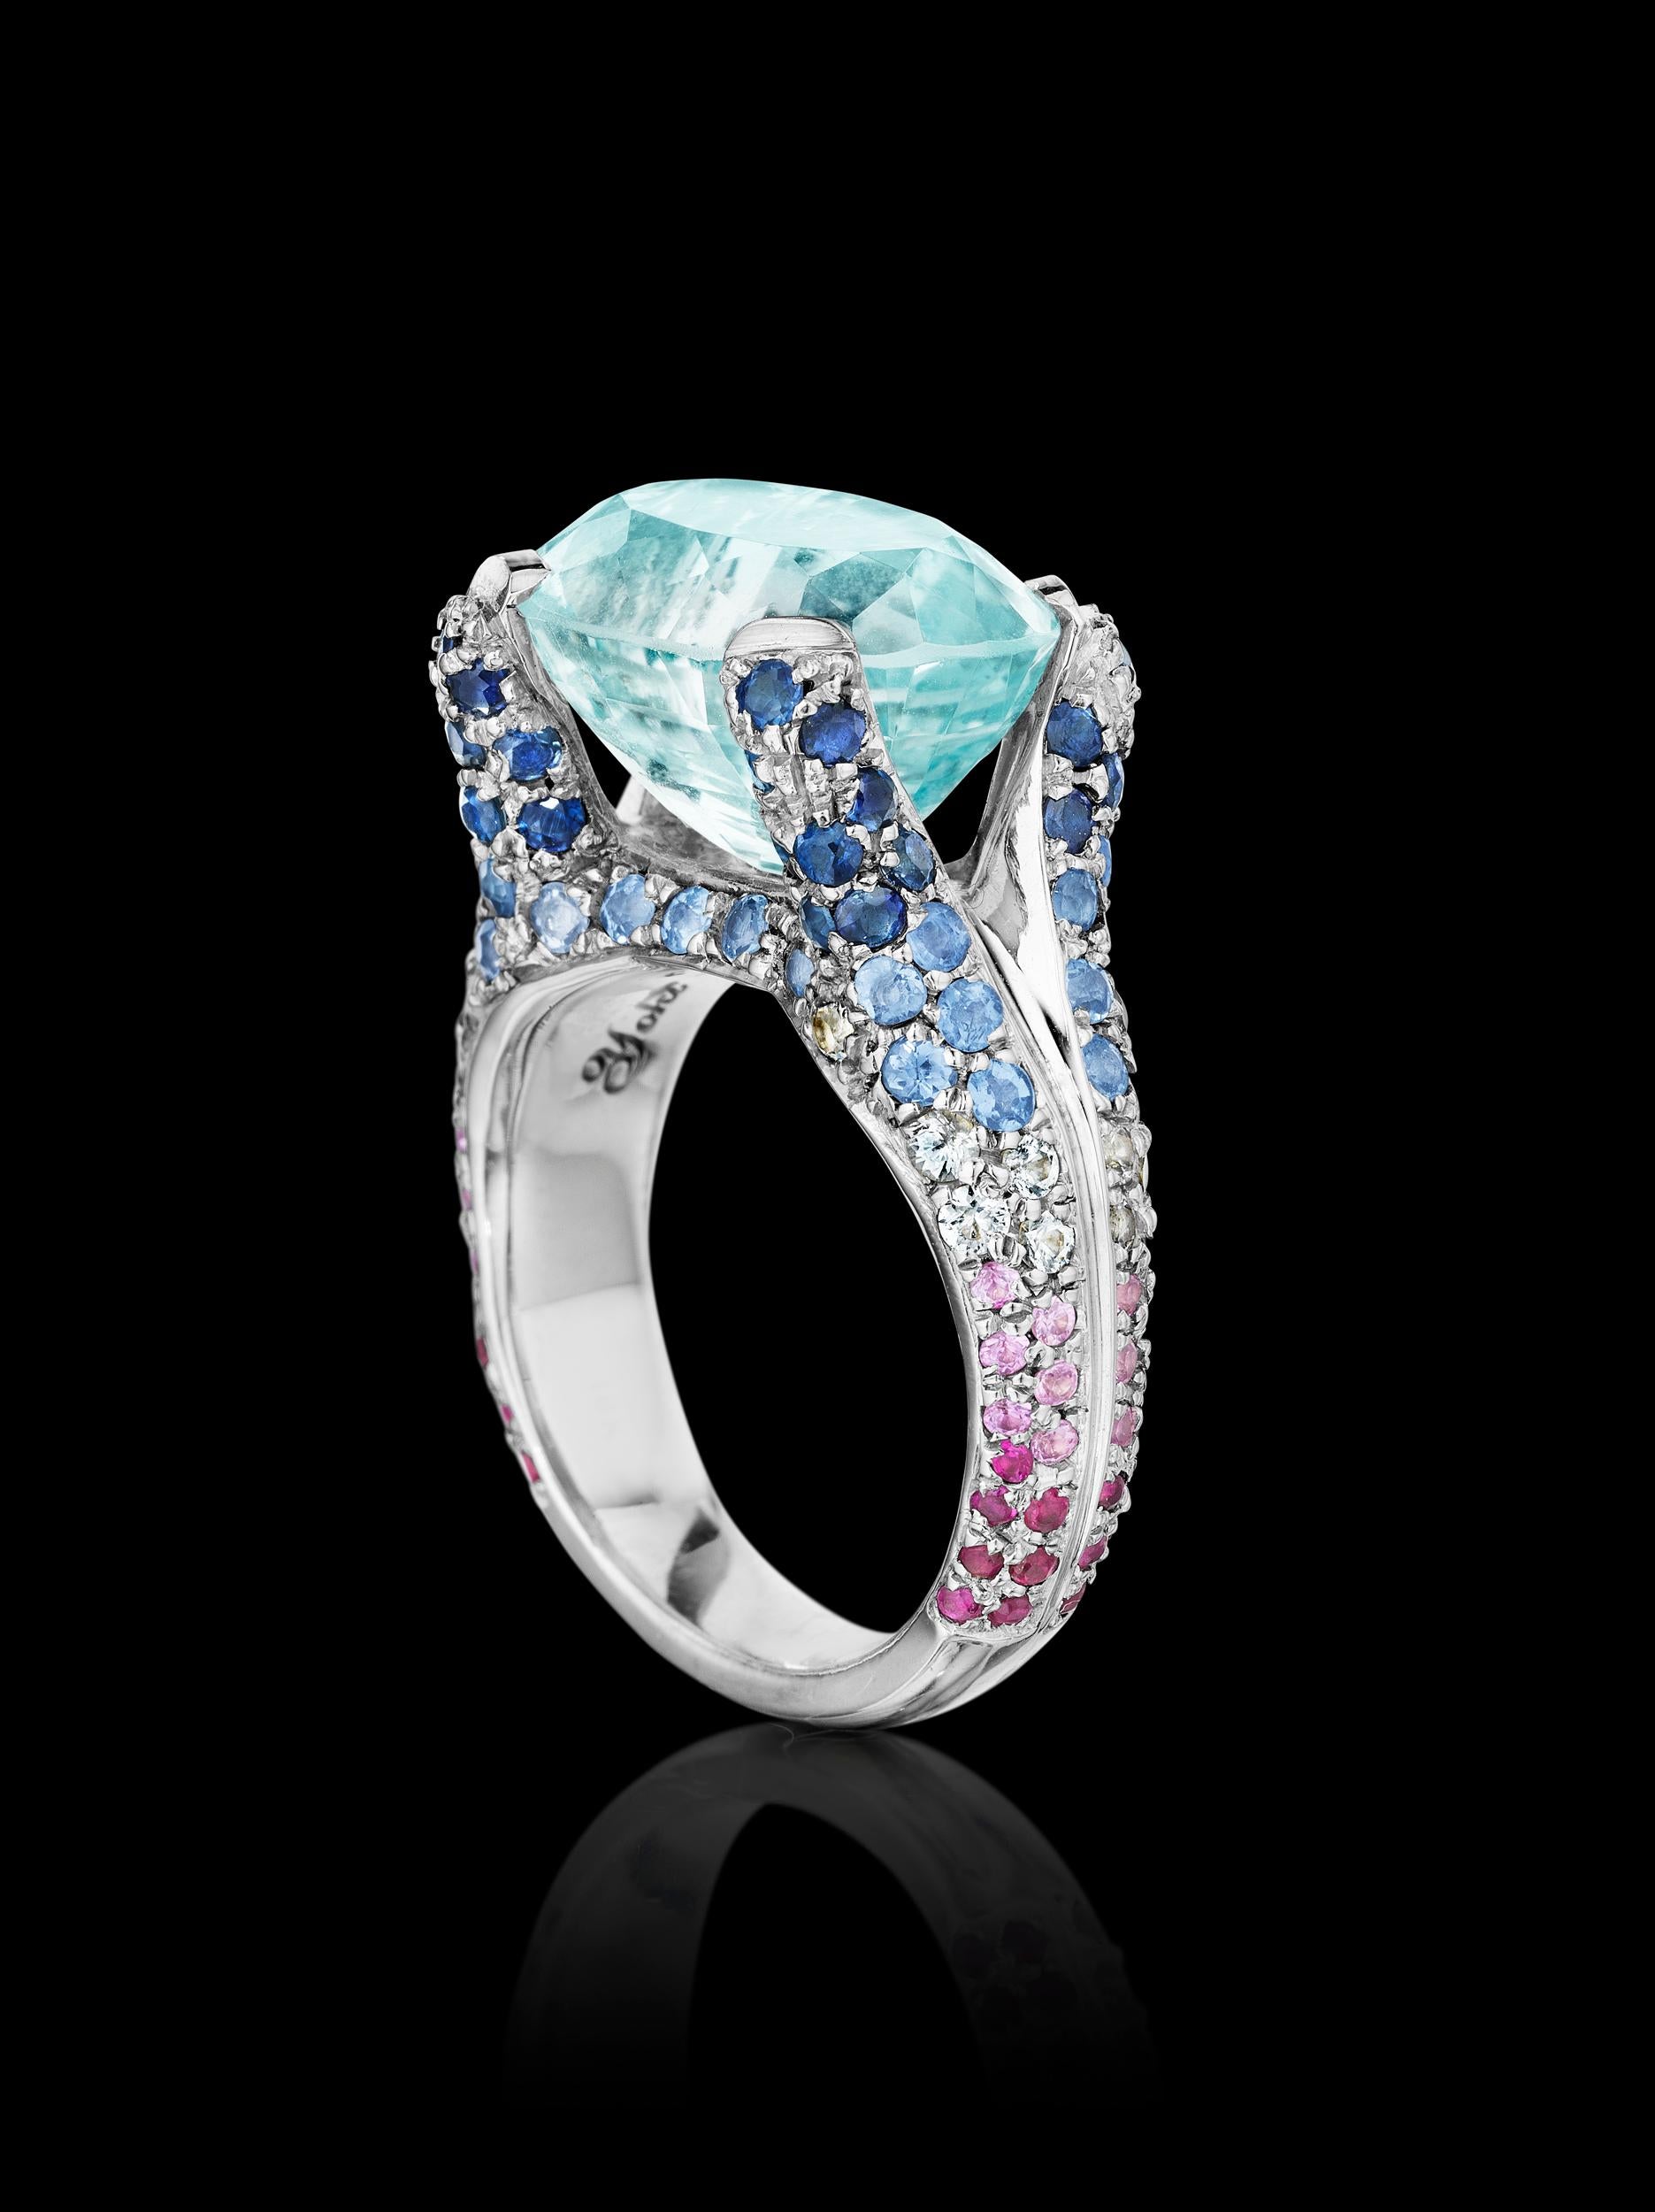 Ring features Aquamarine, Rubies, Deep Blue Sapphires, Light Blue Sapphires, White Sapphires and Rubies. Inspired by the lush tropical forests alongside of the Caribbean Coastline.  Ring is set in 18k white gold. 

Size 7.25 

Center stone: